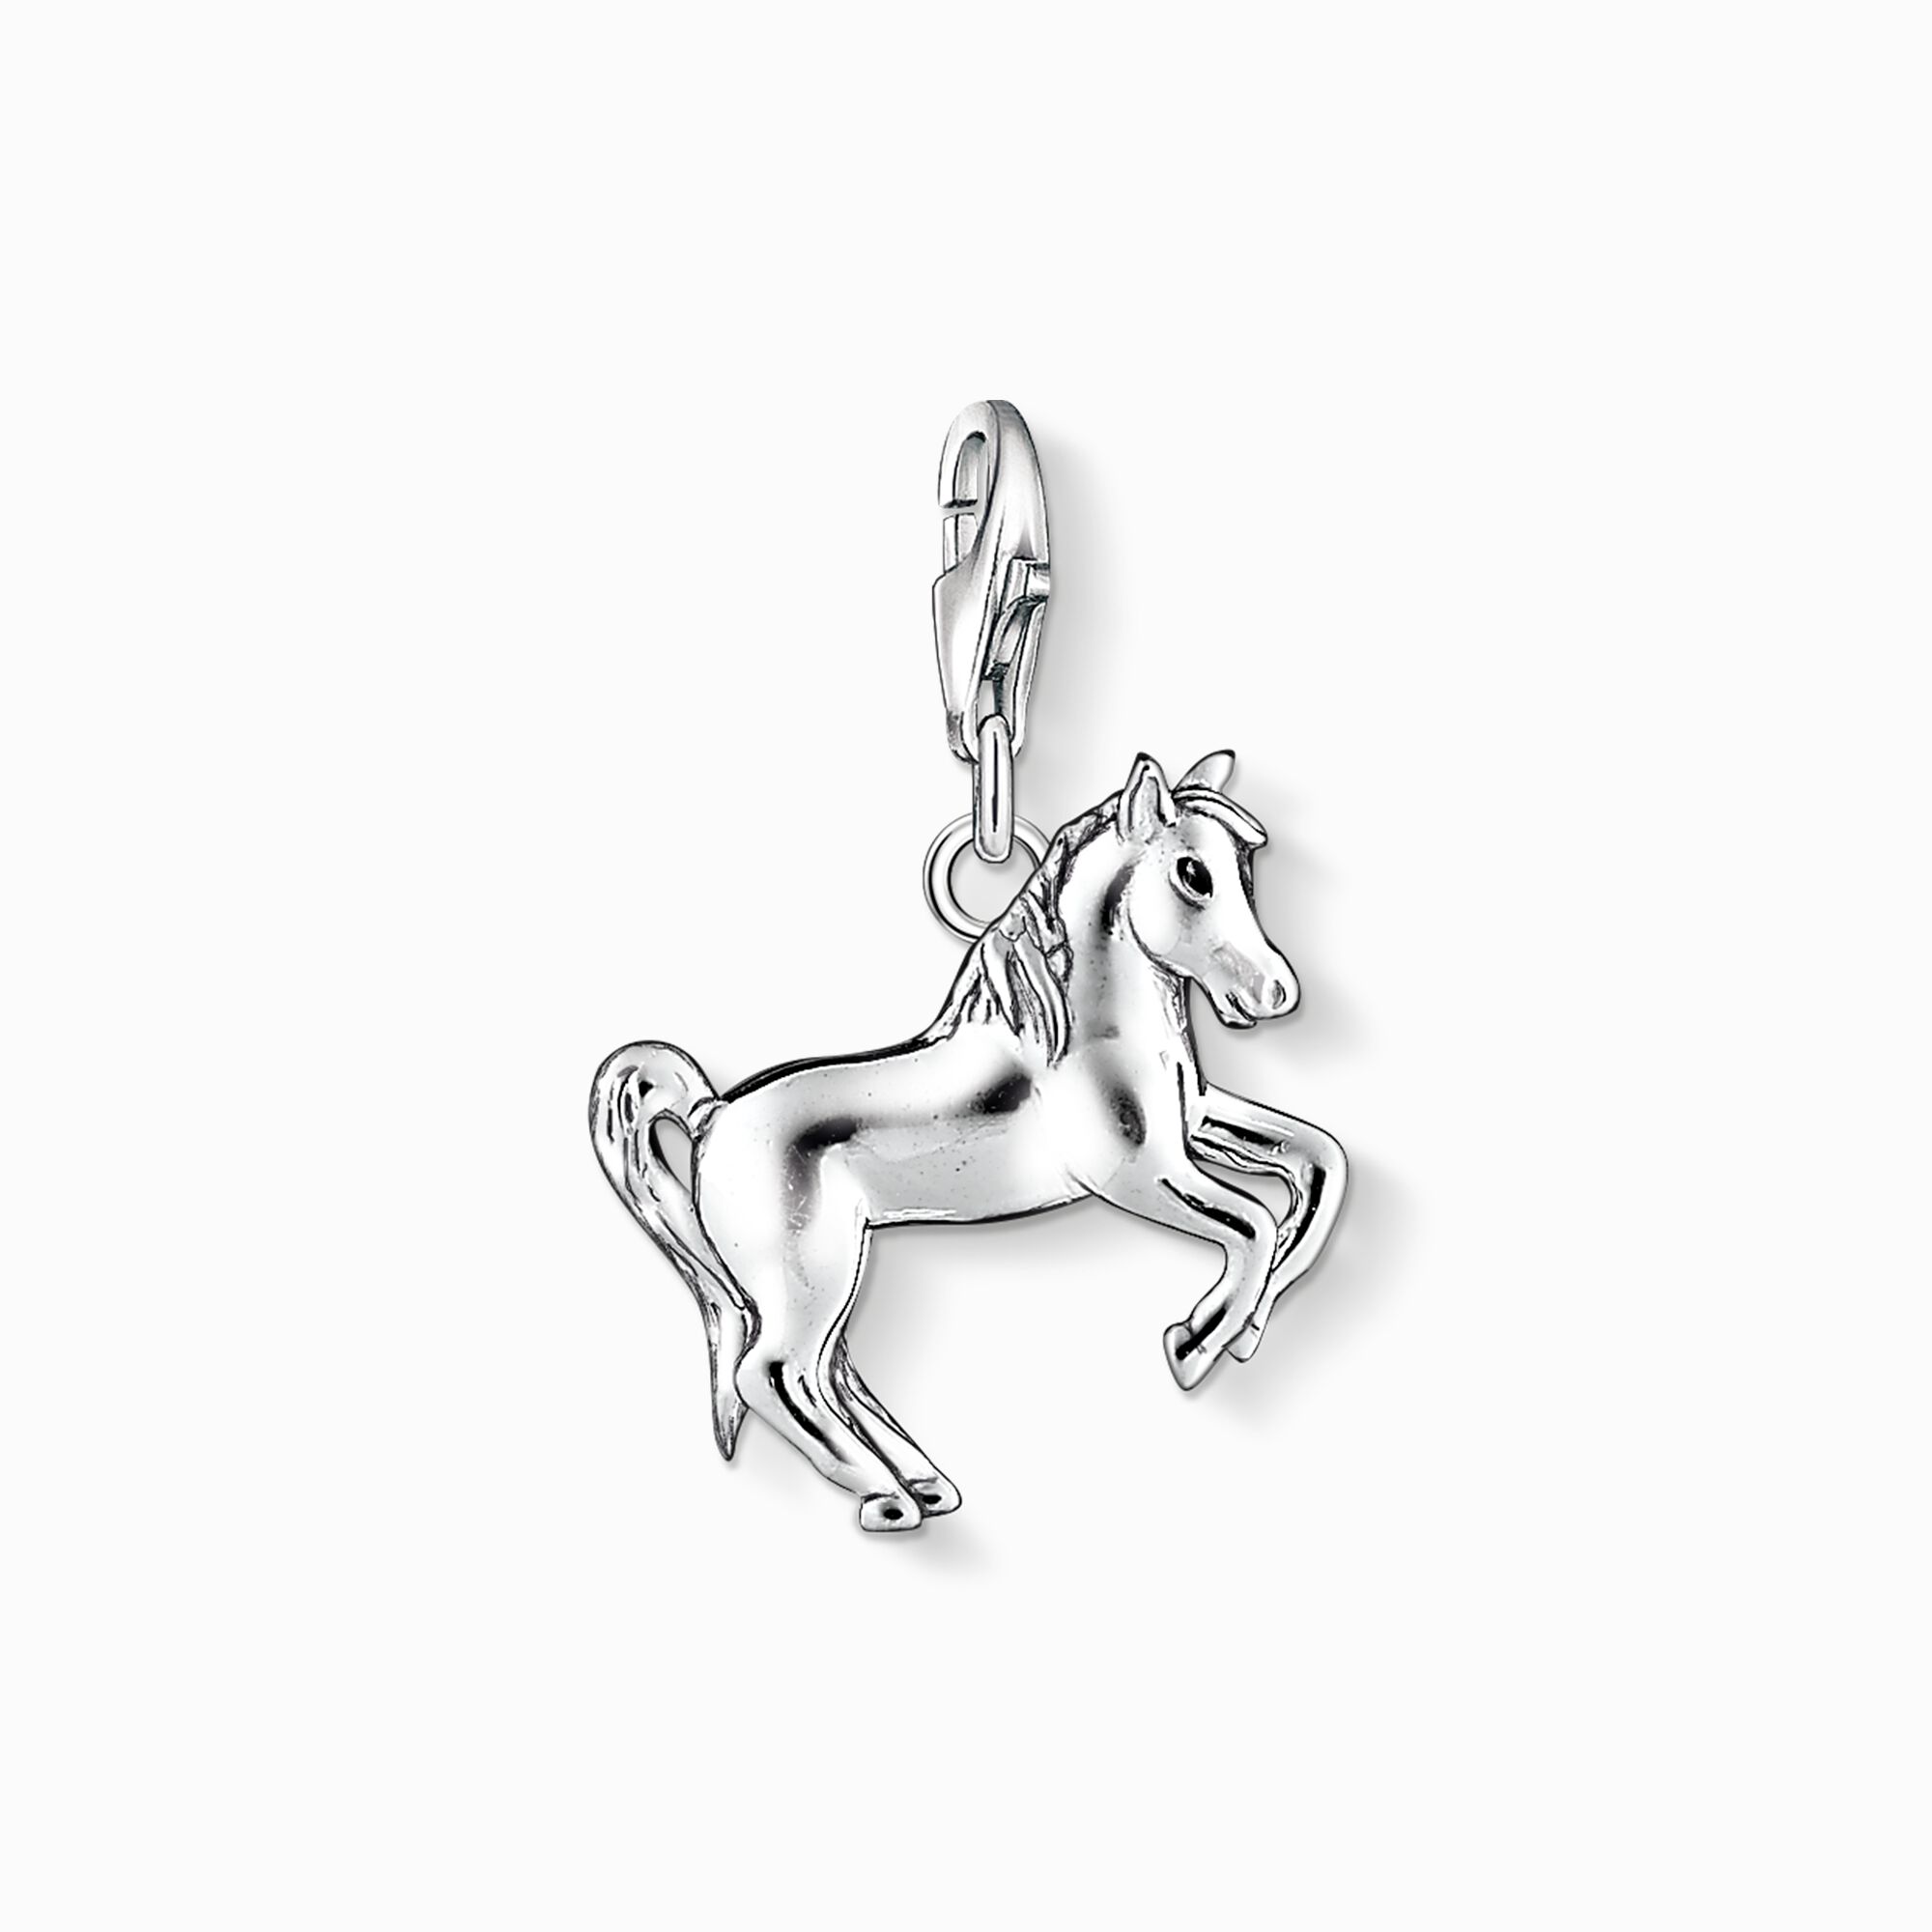 Charm pendant horse from the Charm Club collection in the THOMAS SABO online store